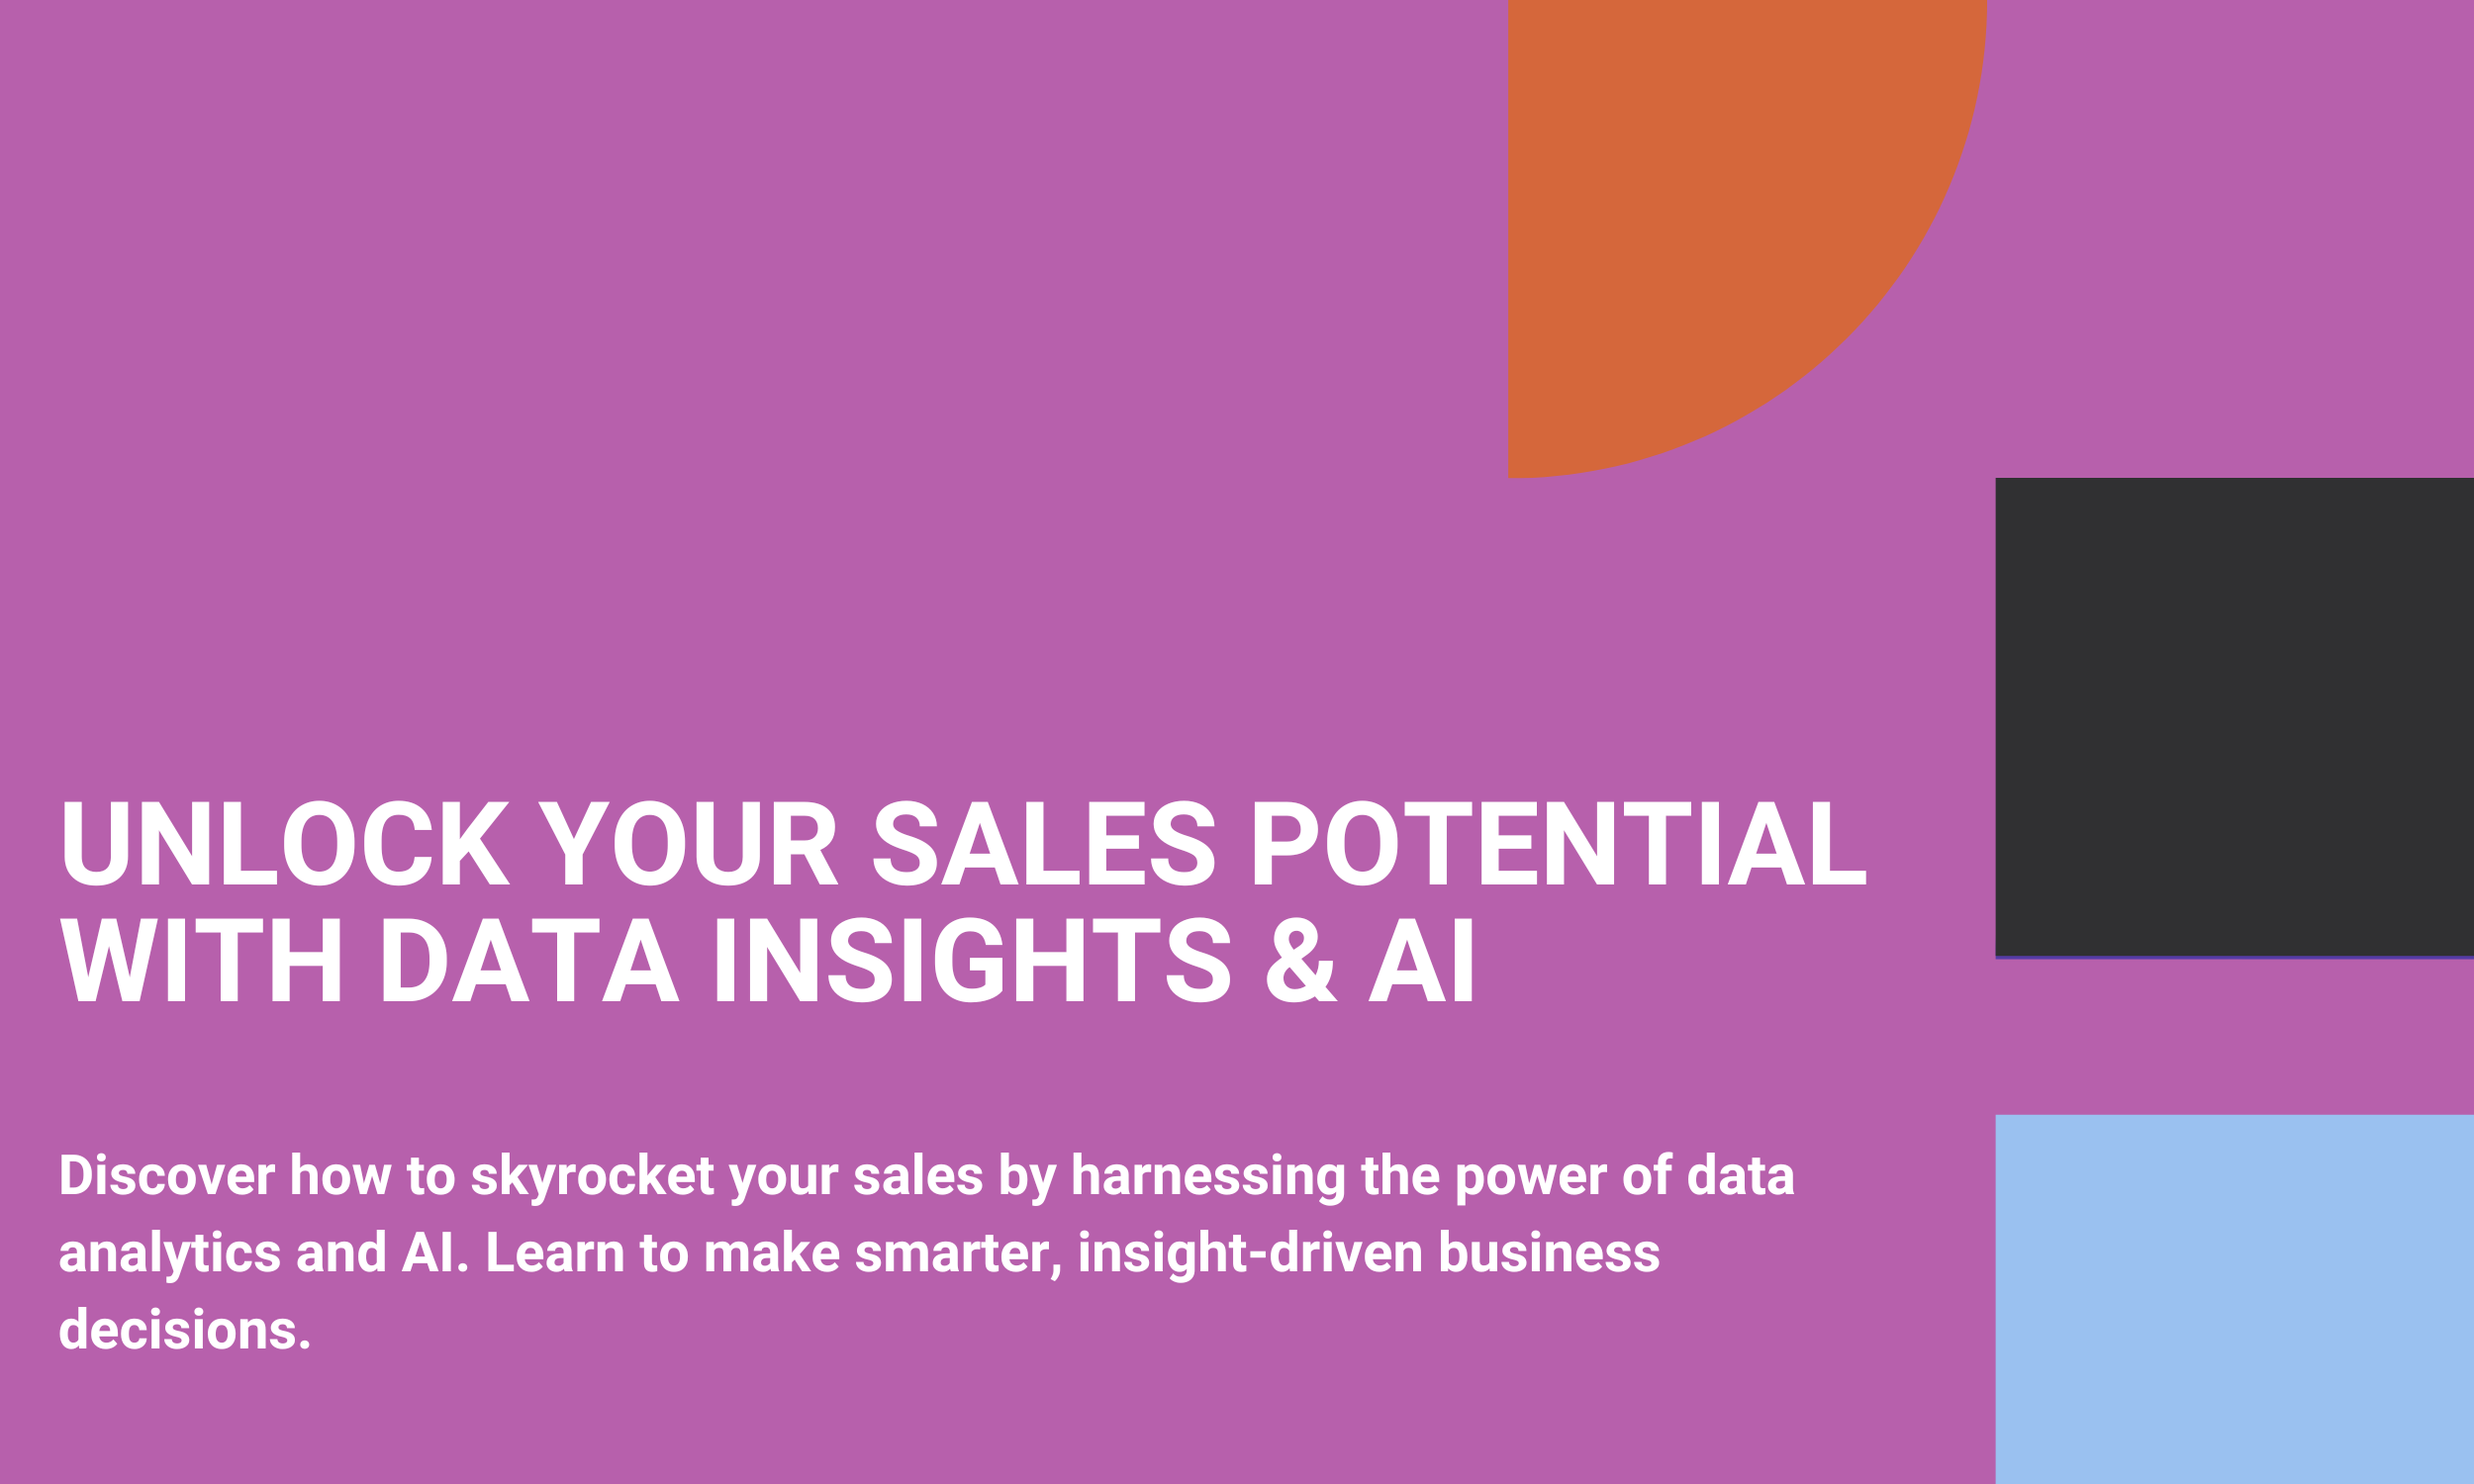 Unlock Your Sales Potential with Data Insights & AI